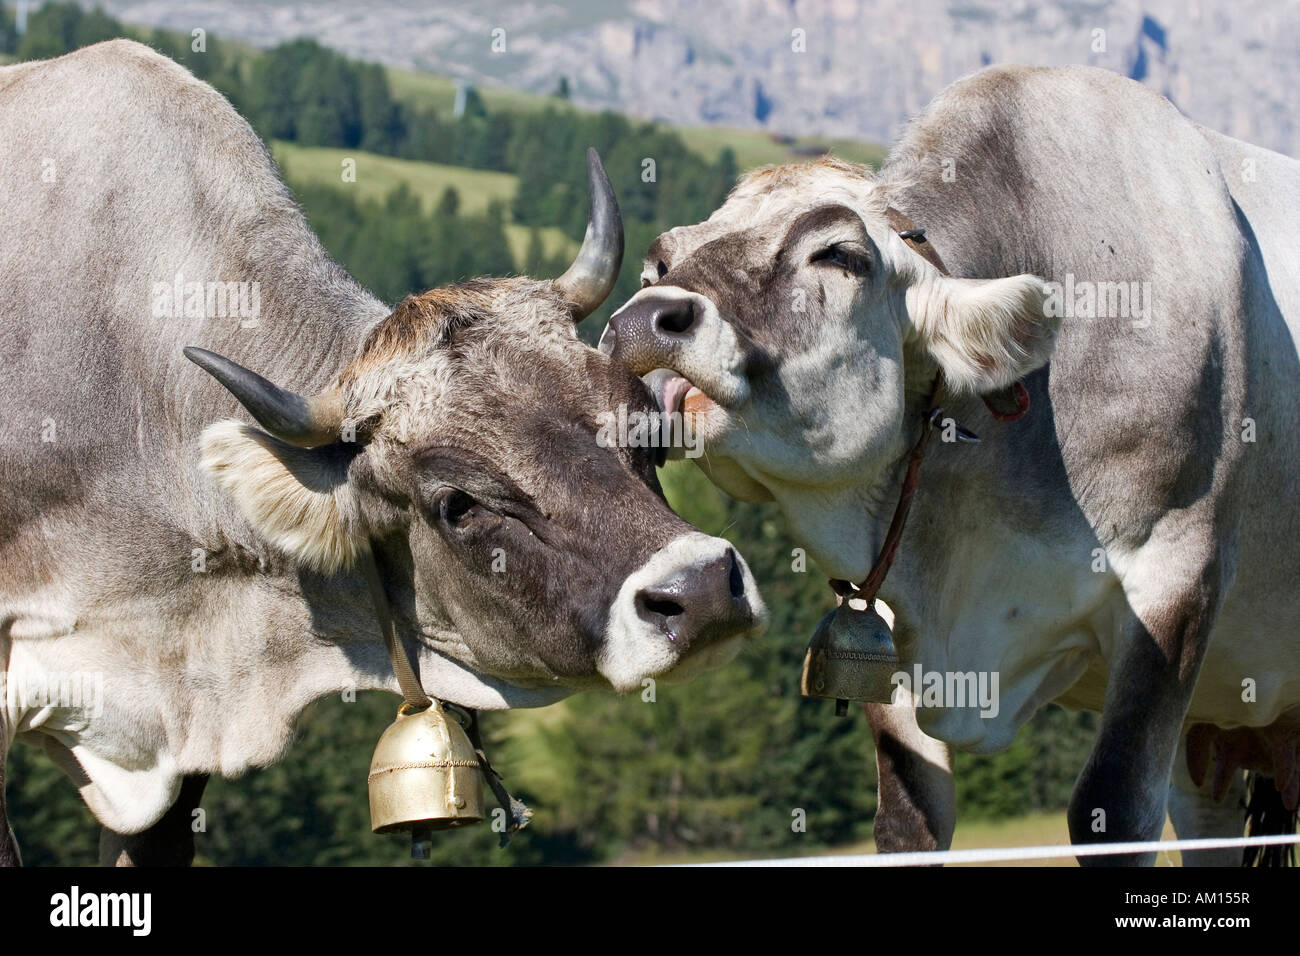 Cow is licking another cow, Seiser Alm, South Tyrol, Italy Stock Photo